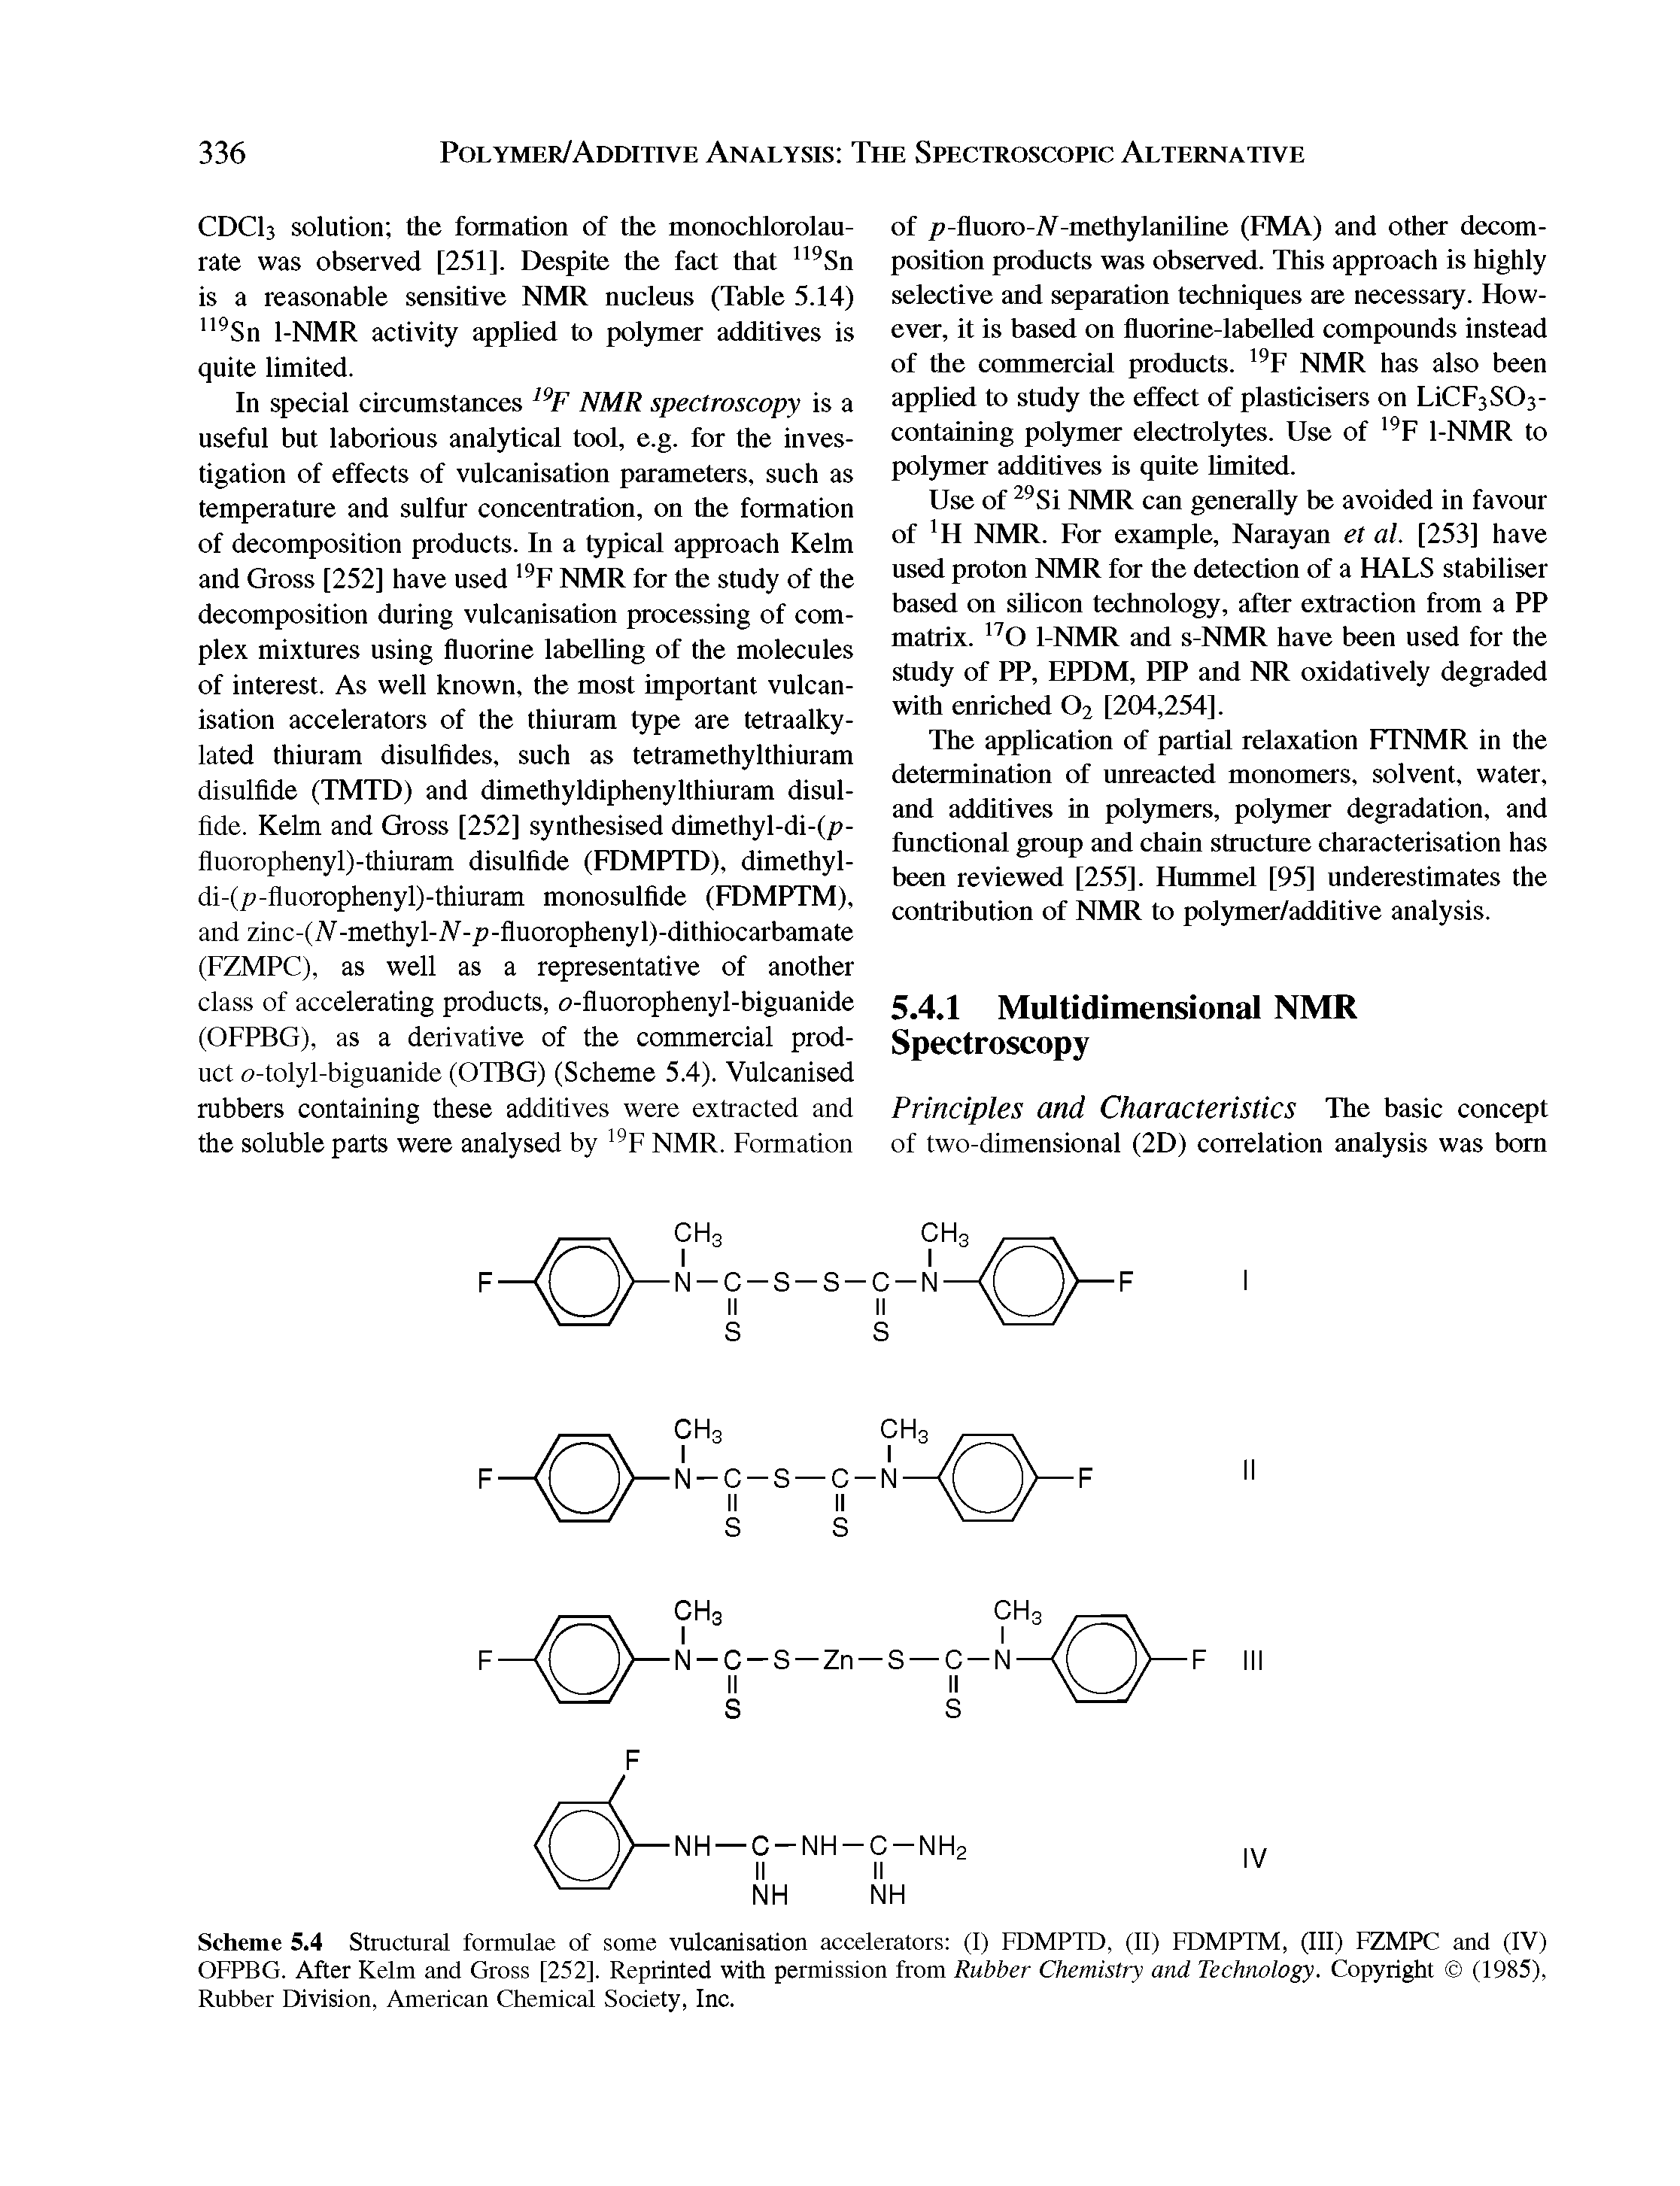 Scheme 5.4 Structural formulae of some vulcanisation accelerators (I) FDMPTD, (II) FDMPTM, (III) FZMPC and (IV) OFPBG. After Kelm and Gross [252]. Reprinted with permission from Rubber Chemistry and Technology. Copyright (1985), Rubber Division, American Chemical Society, Inc.